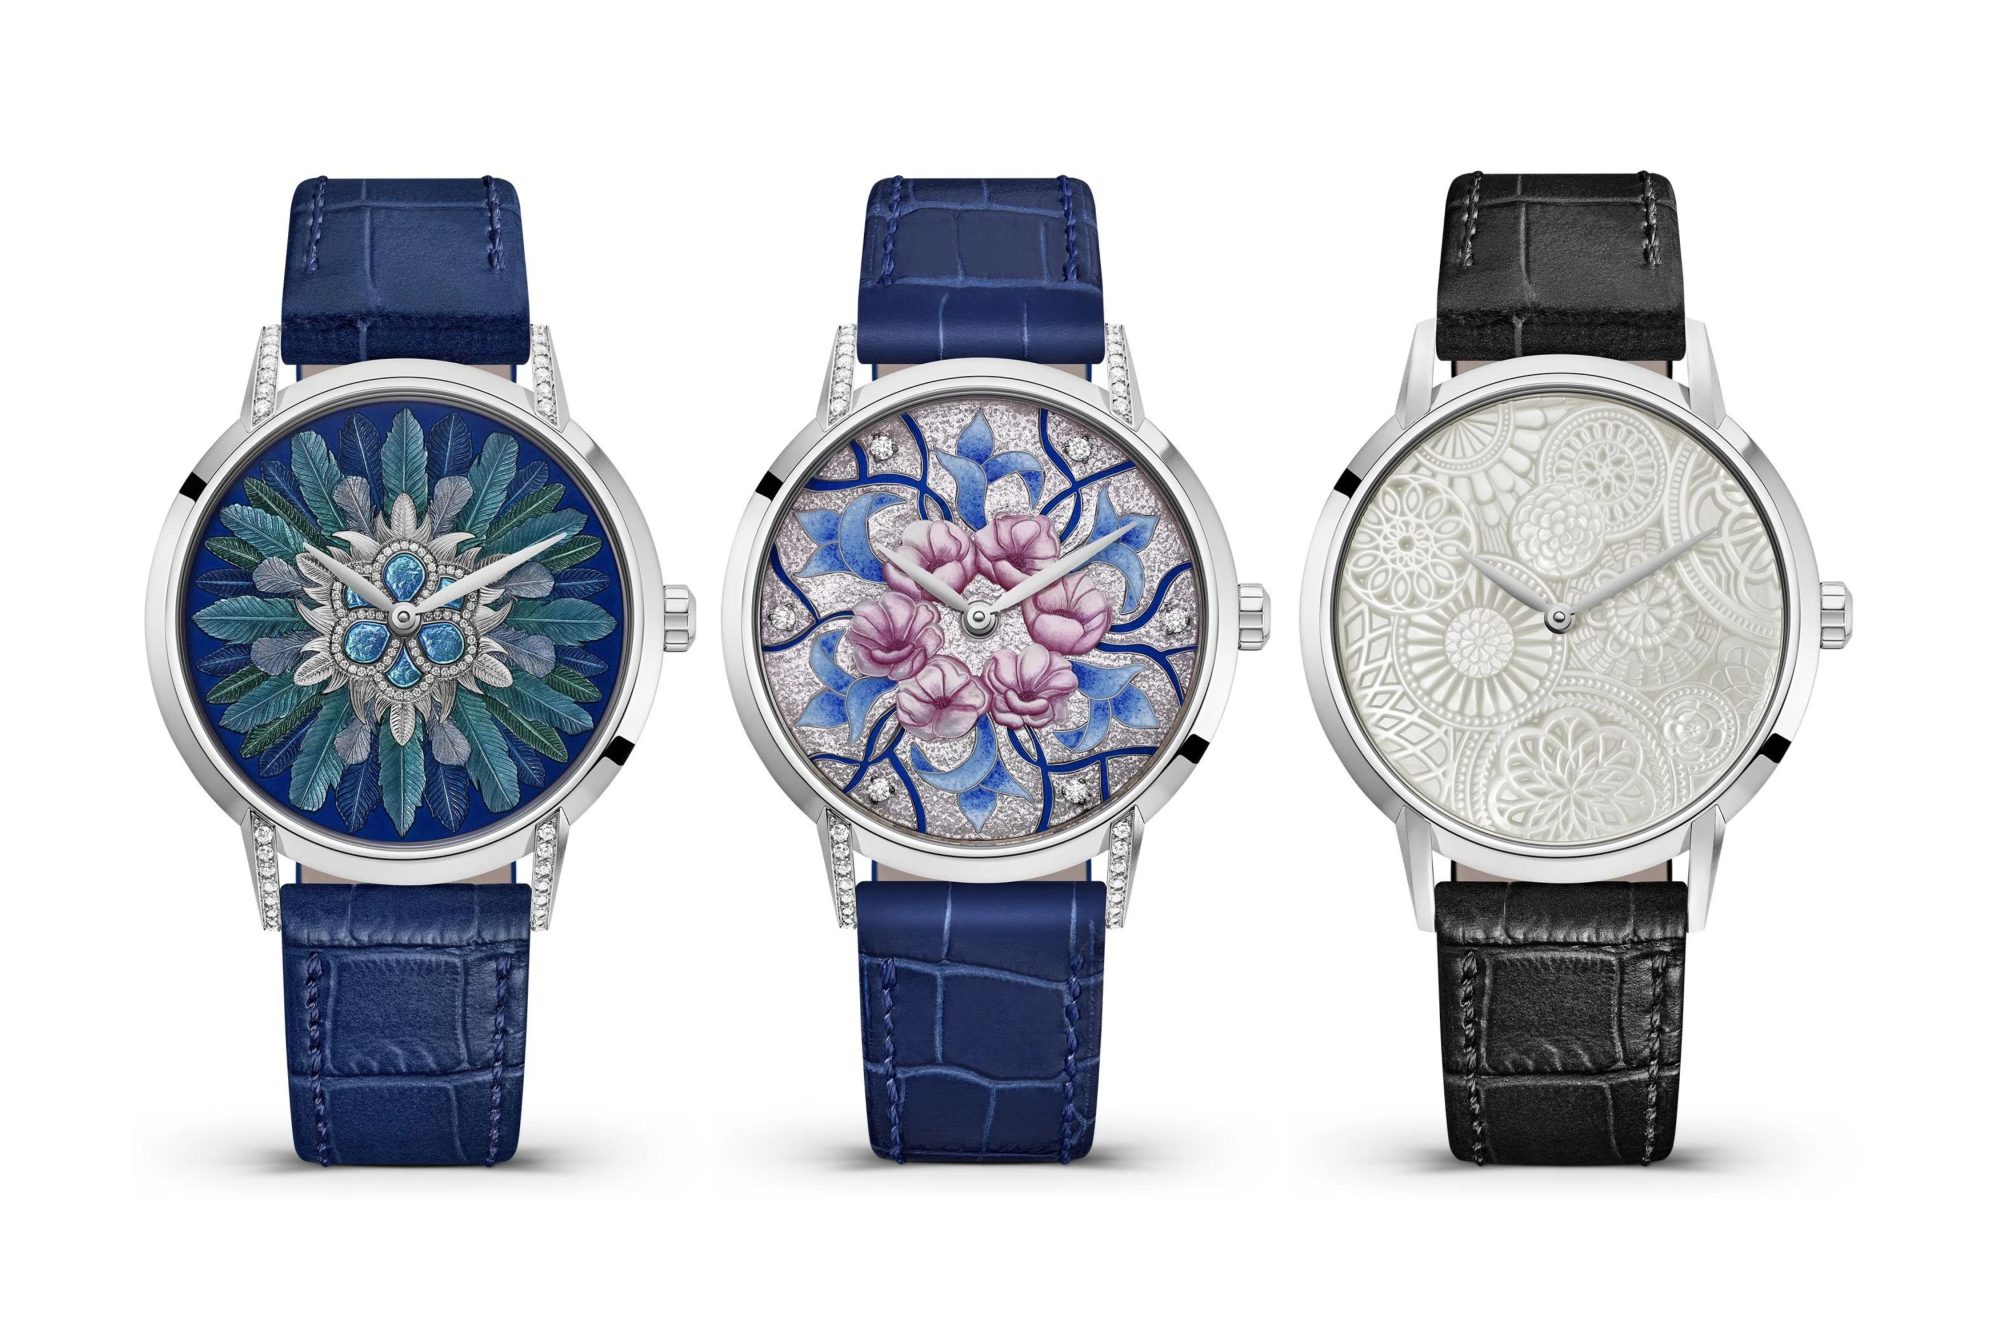 TAOS introduces first collection with seven artistic timepieces